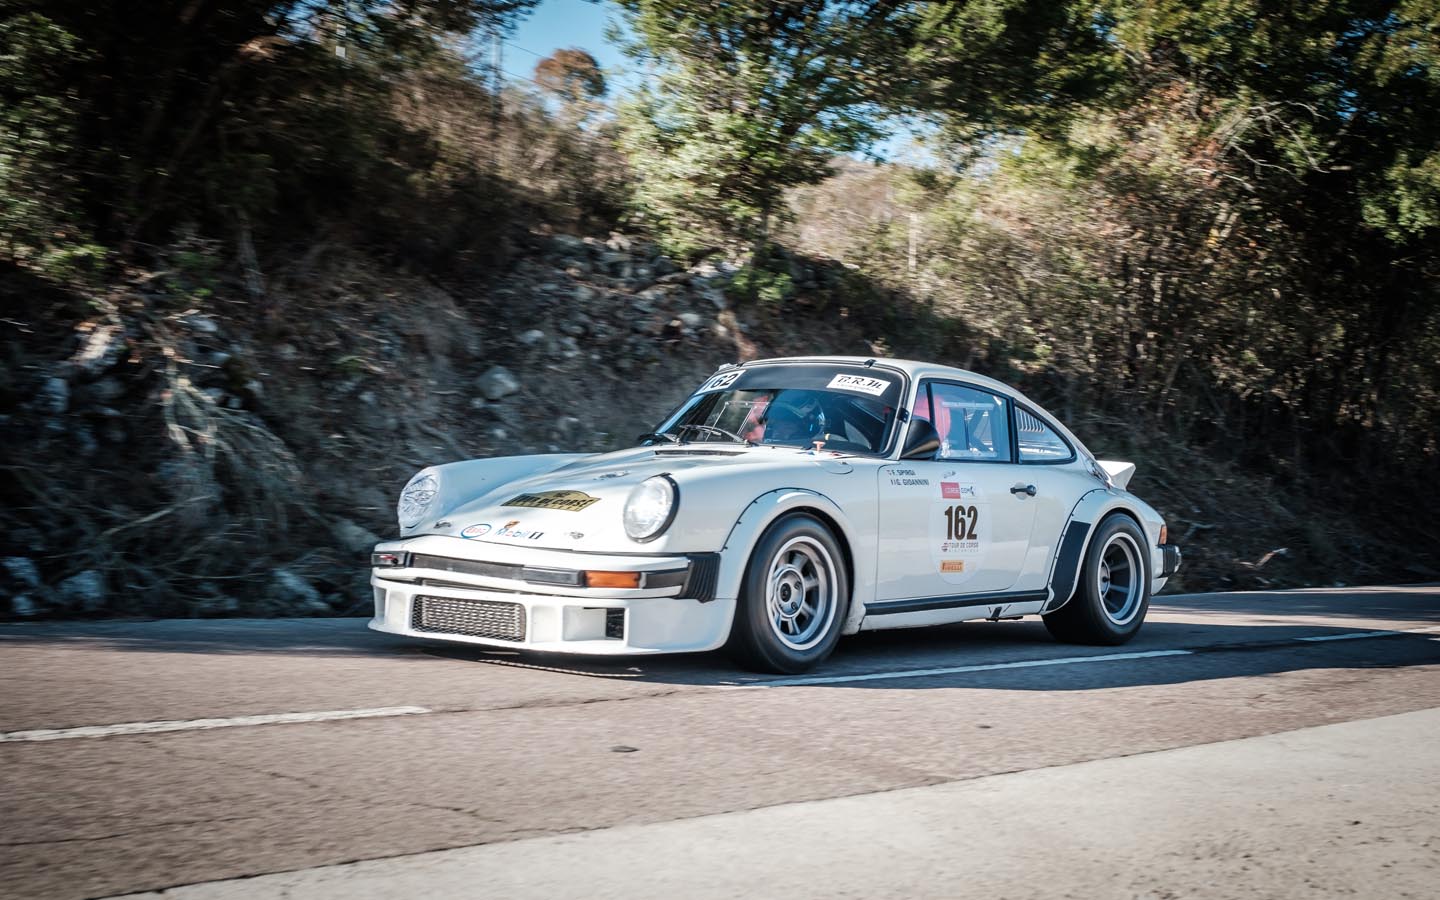 get a closer look at porsche 911 and other iconic vehicles at the Icons of Porsche 2023